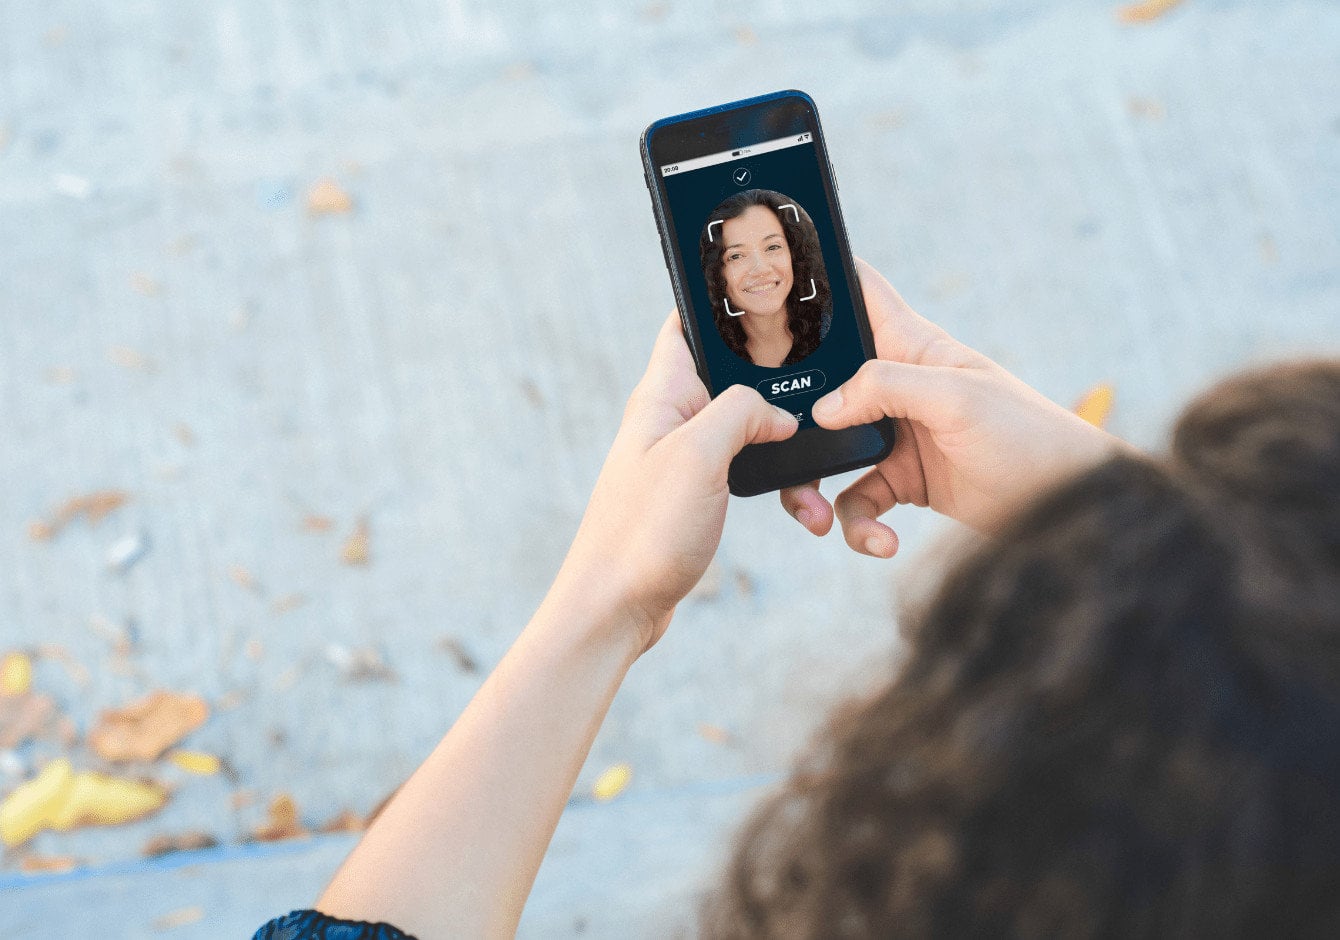 woman holding a smartphone and it requires face ID verification